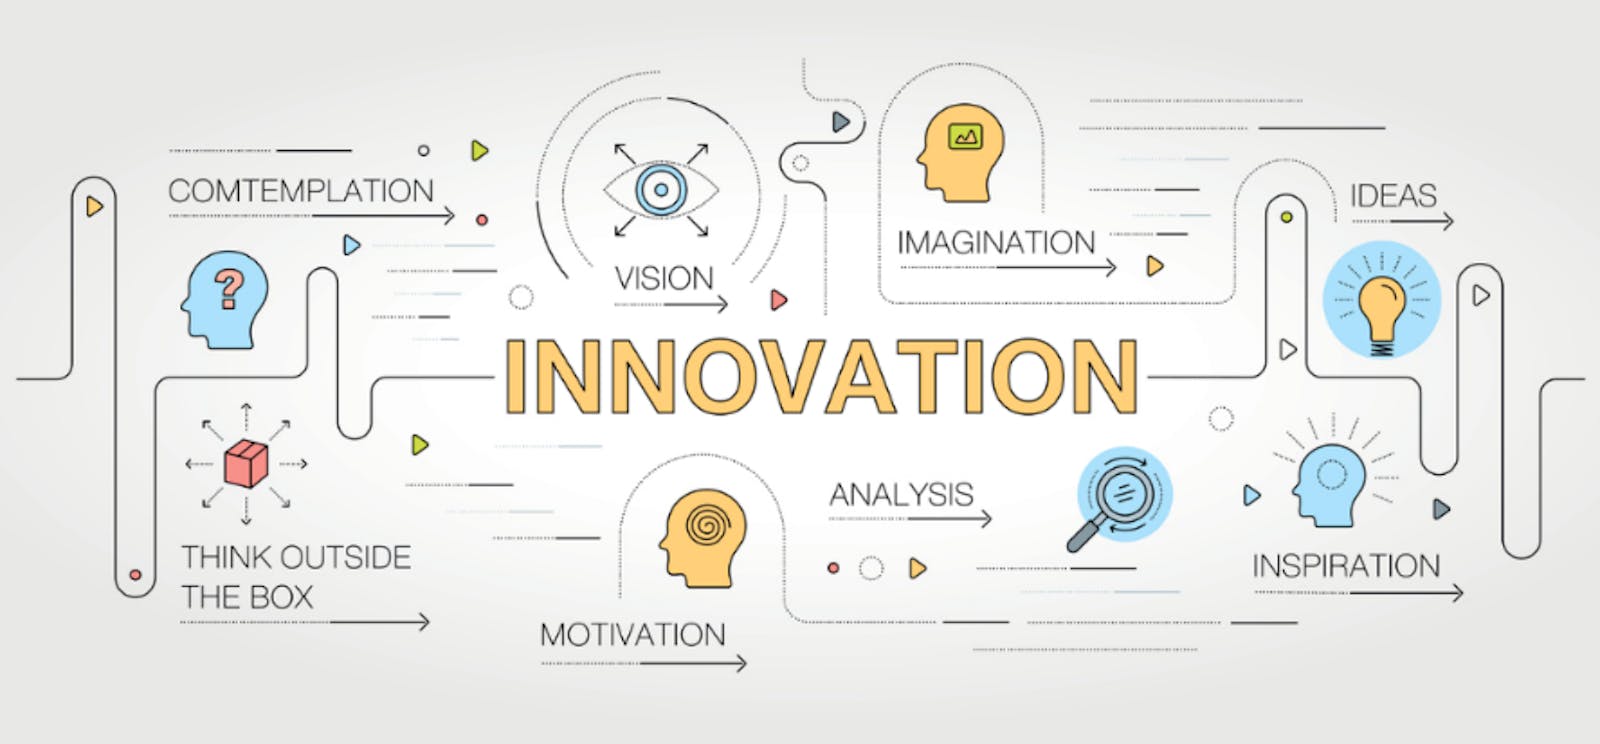 Evaluating Your Innovation Idea